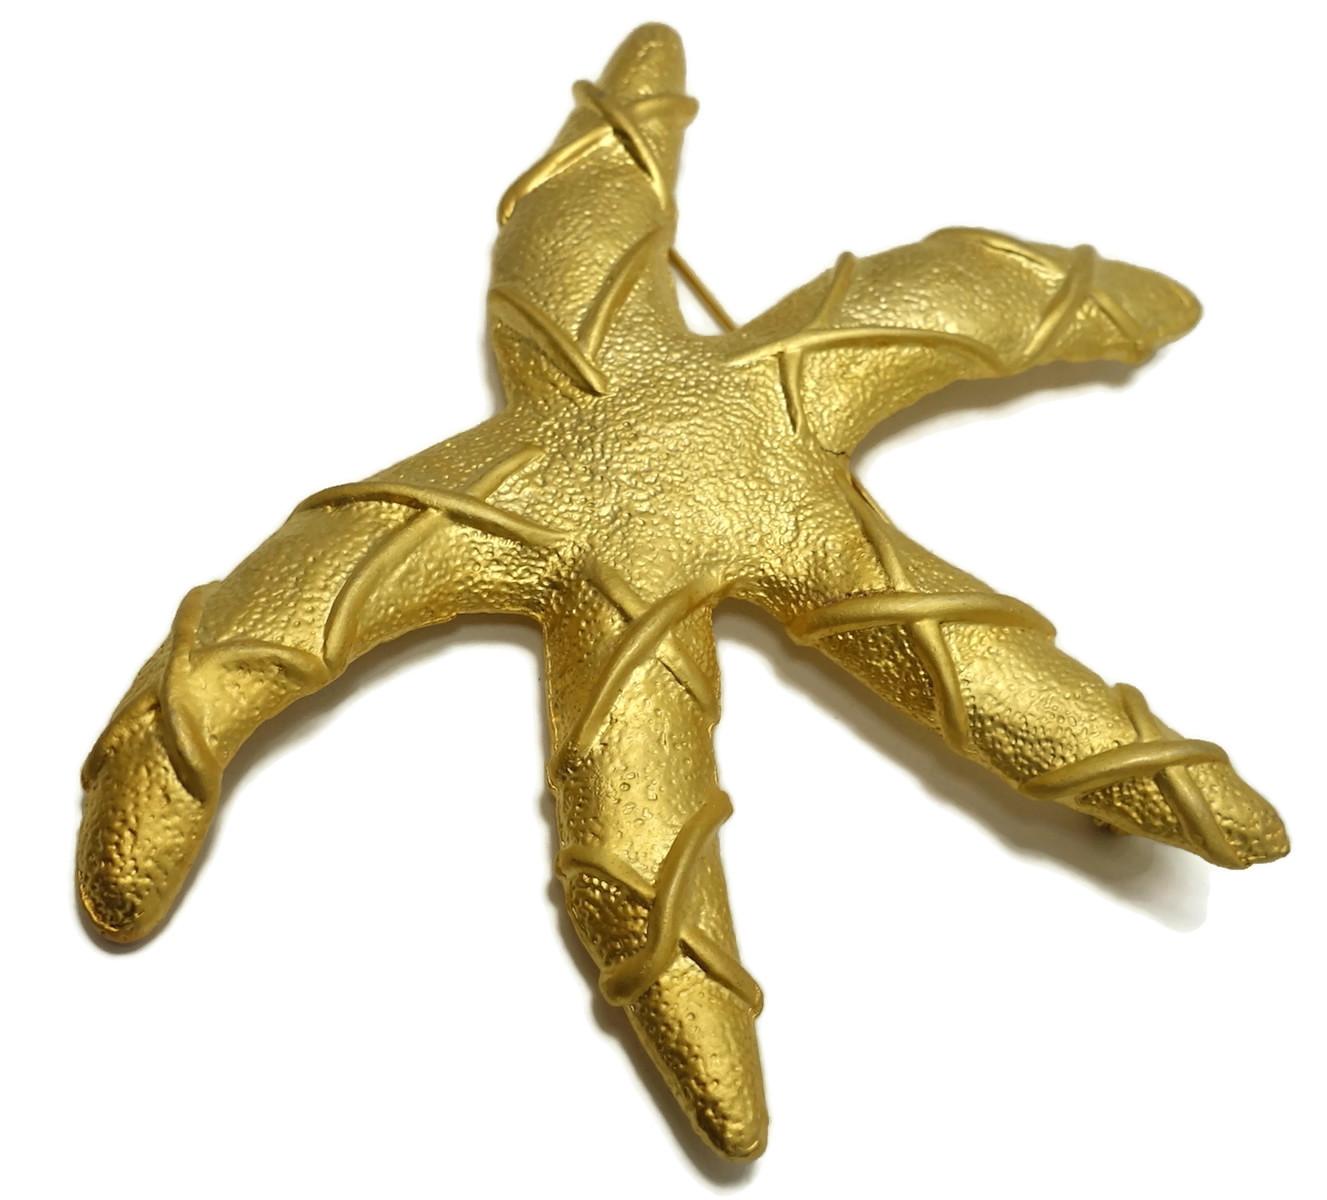 This large golden starfish brooch measure 4” x 3-1/8” and makes a huge impression.  We have never seen this fantastic brooch before and everyone who sees this unusual brooch walks away with a favorable impression.  It is in excellent condition.